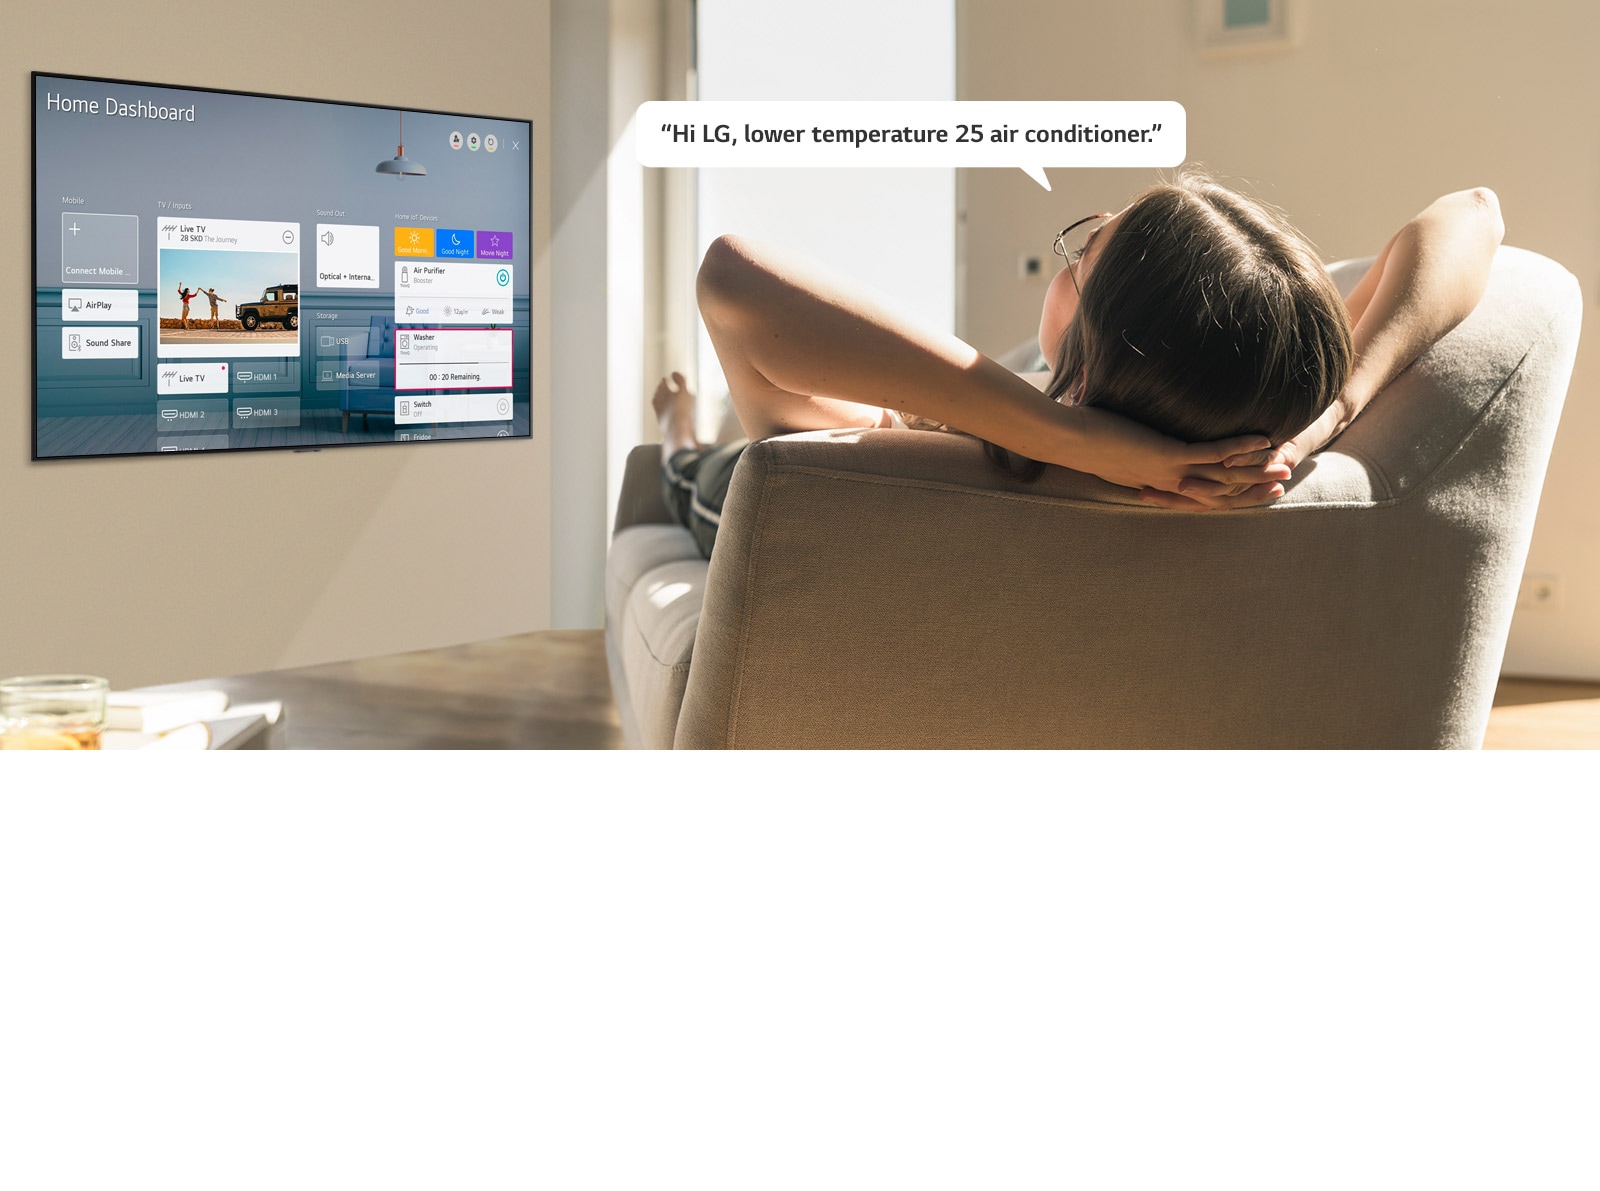 Woman lying on a sofa telling TV to lower the temperature with Home Dashboard on the TV screen